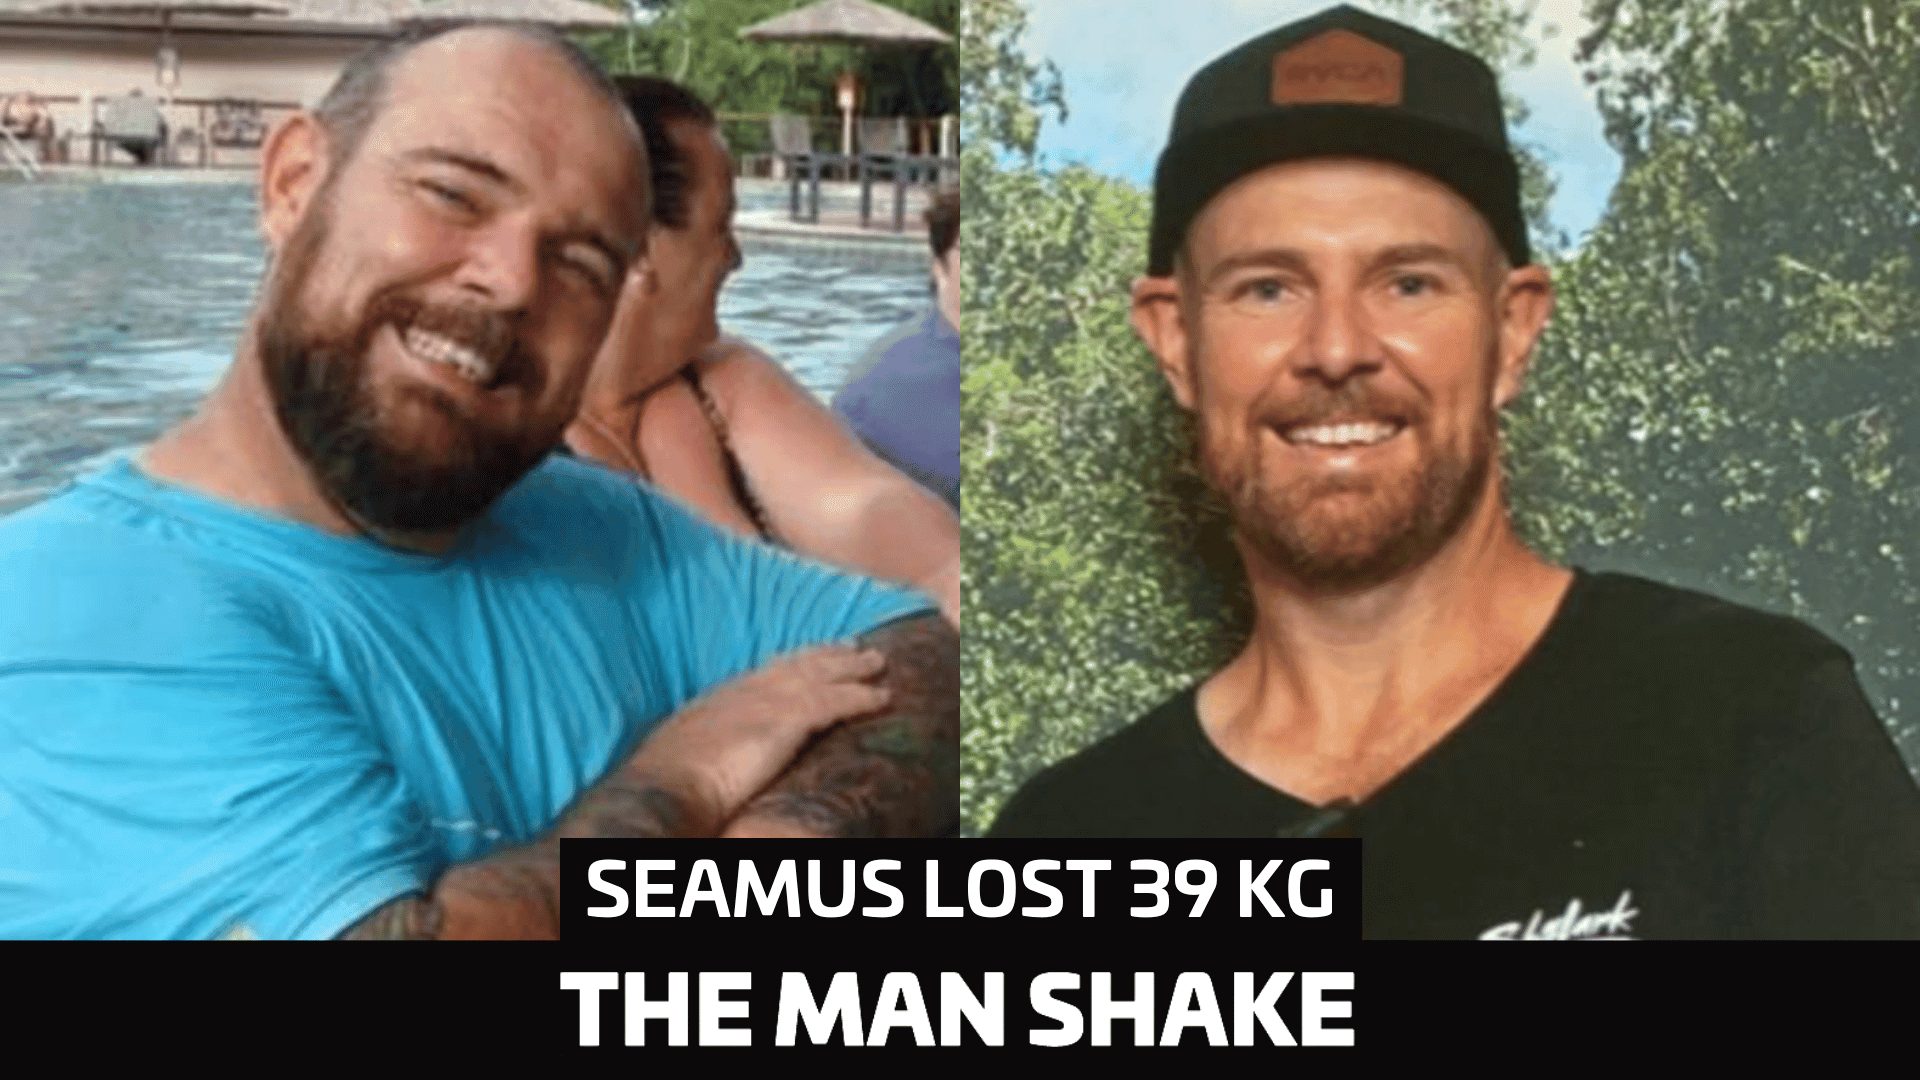 Seamus turned everything around and lost 39kg